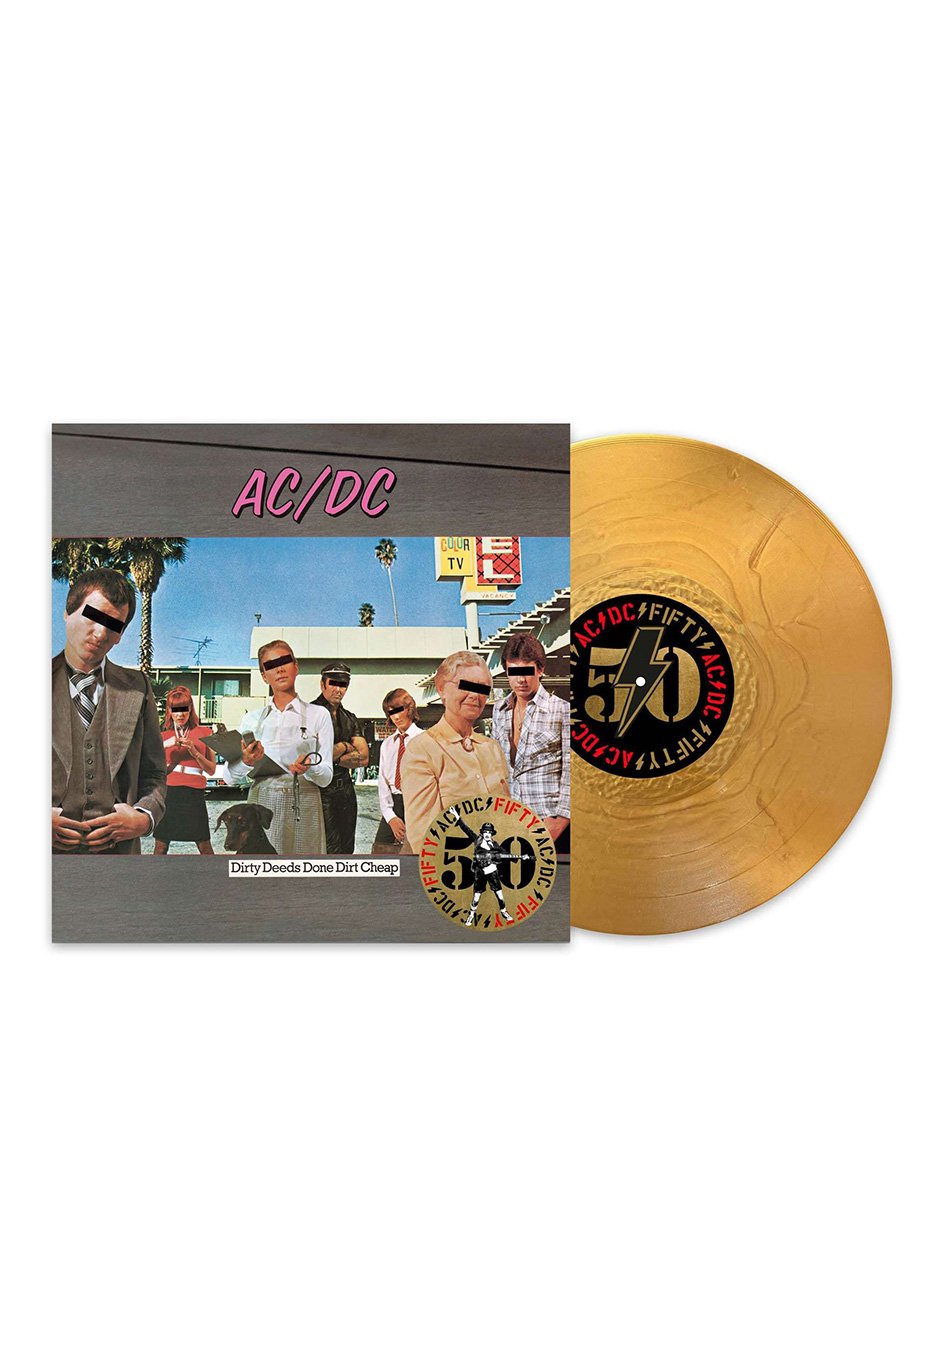 AC/DC - Dirty Deeds Done Dirt Cheap (Limited 50th Anniversary Edition) Gold - Colored Vinyl